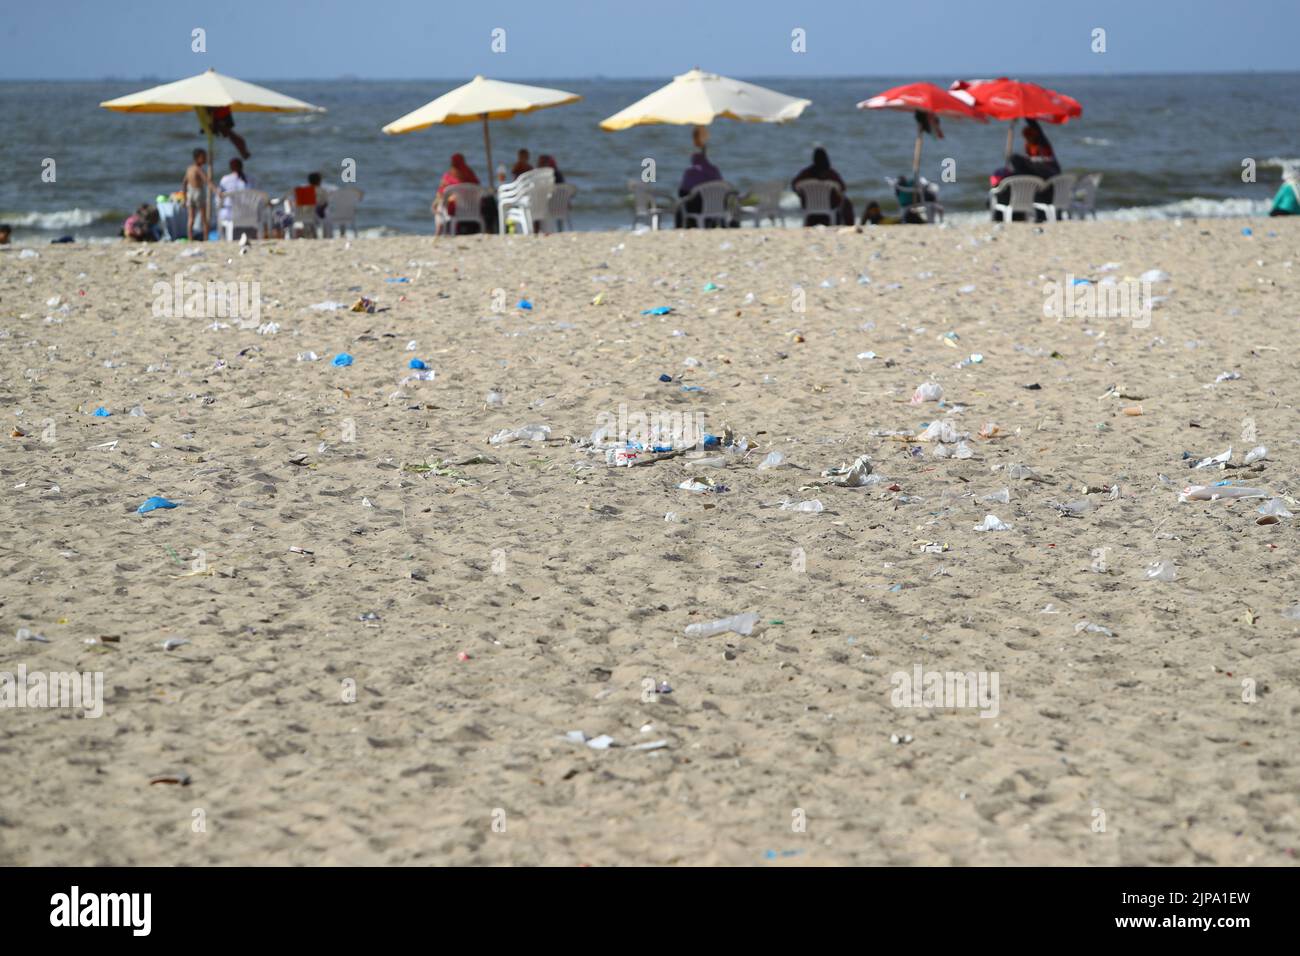 (220816) -- ALEXANDRIA, Aug. 16, 2022 (Xinhua) -- Photo taken on Aug. 13, 2022 shows a beach before the cleanup campaign in Alexandria, Egypt. On the beaches in the Egyptian city of Alexandria, a group of Egyptian young people are usually seen holding green and white plastic bags to collect the scattering waste. They are participants in a cleanup campaign organized by Banlastic Egypt, an environmental project launched by a group of youth in the Mediterranean city. The project seeks to raise the public's awareness of plastic pollution and how single-use plastic waste harms marine life if i Stock Photo